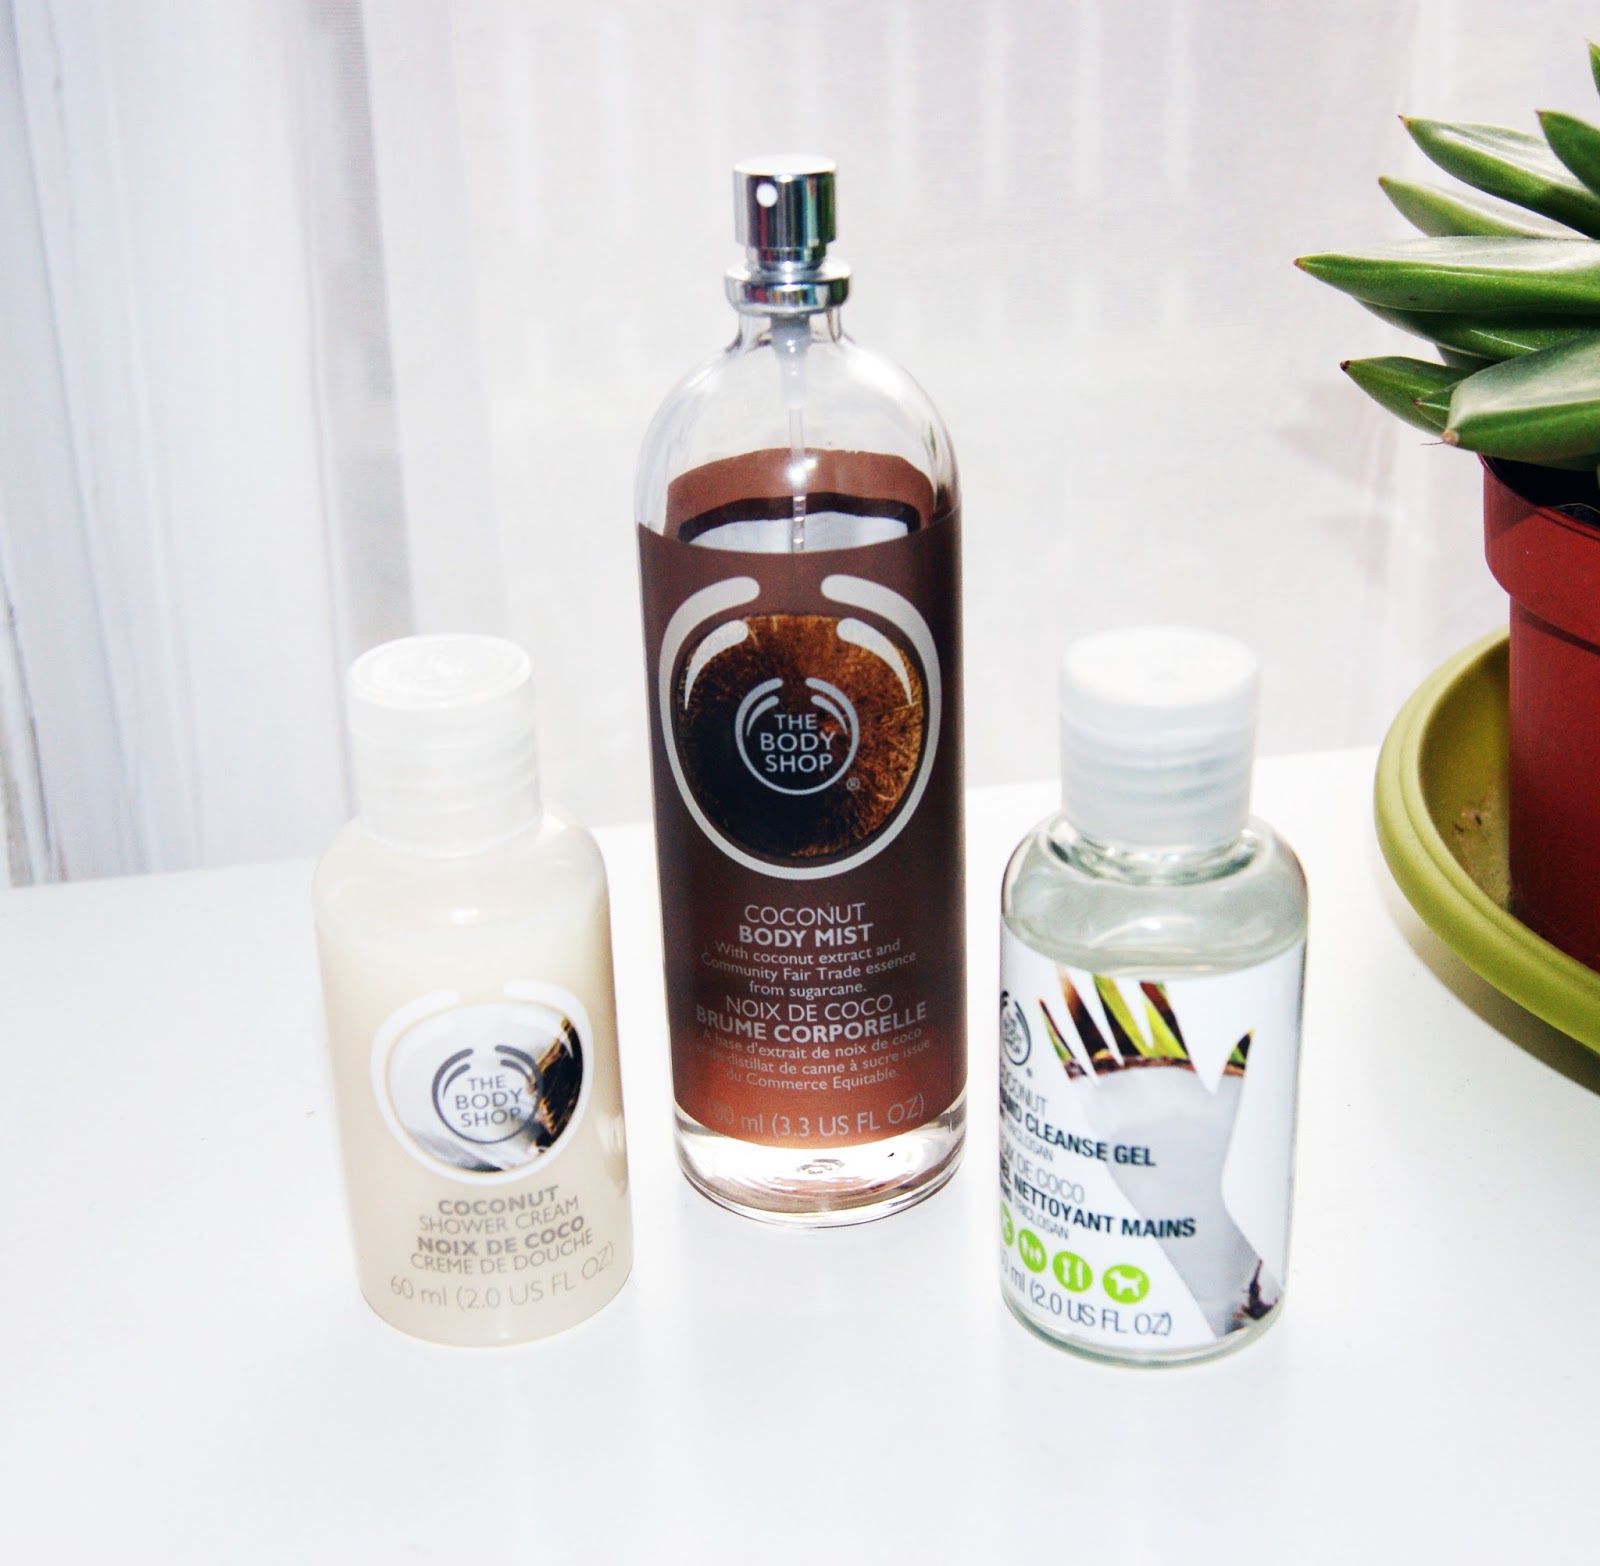 BEAUTY: COCONUTS ABOUT THE BODY SHOP